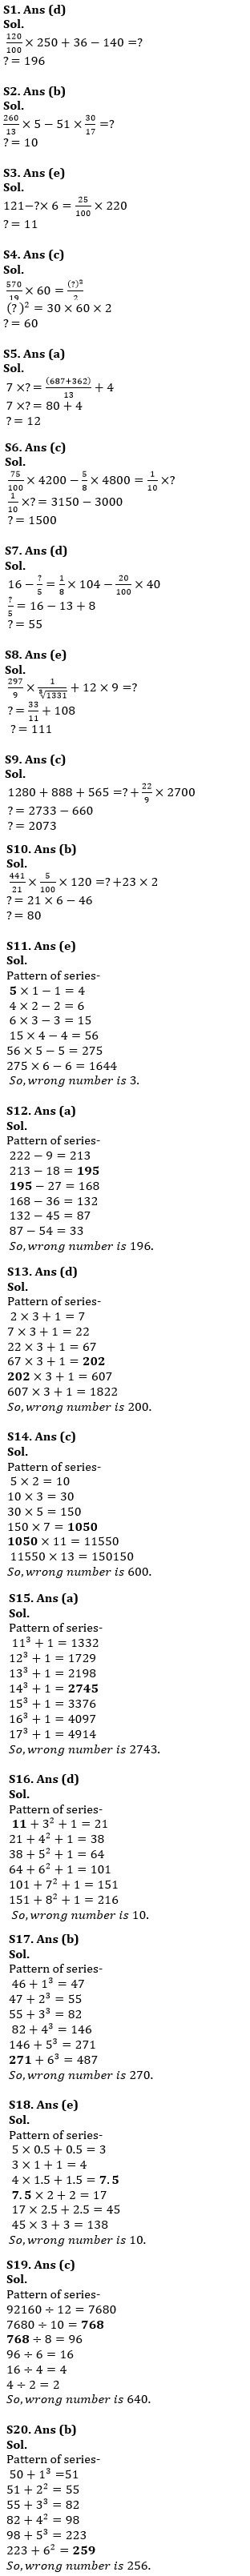 सेबी ग्रेड -A फेज़ -1, 2022 क्वांट क्विज़ : 30th January – Approximation and Wrong Series | Latest Hindi Banking jobs_8.1